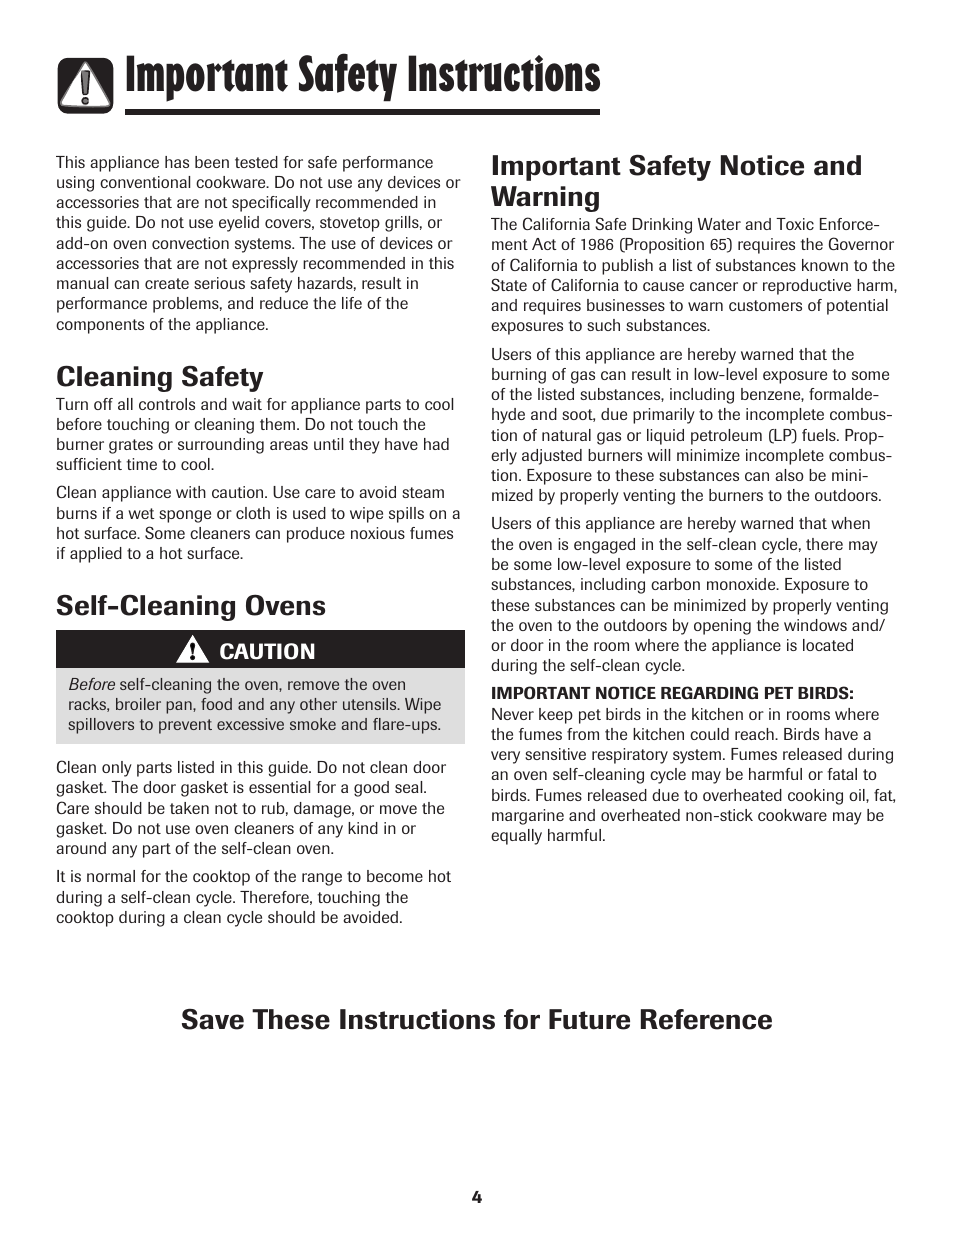 Important safety instructions, Cleaning safety, Save these instructions for future reference | Maytag MGR6751BDW User Manual | Page 5 / 76